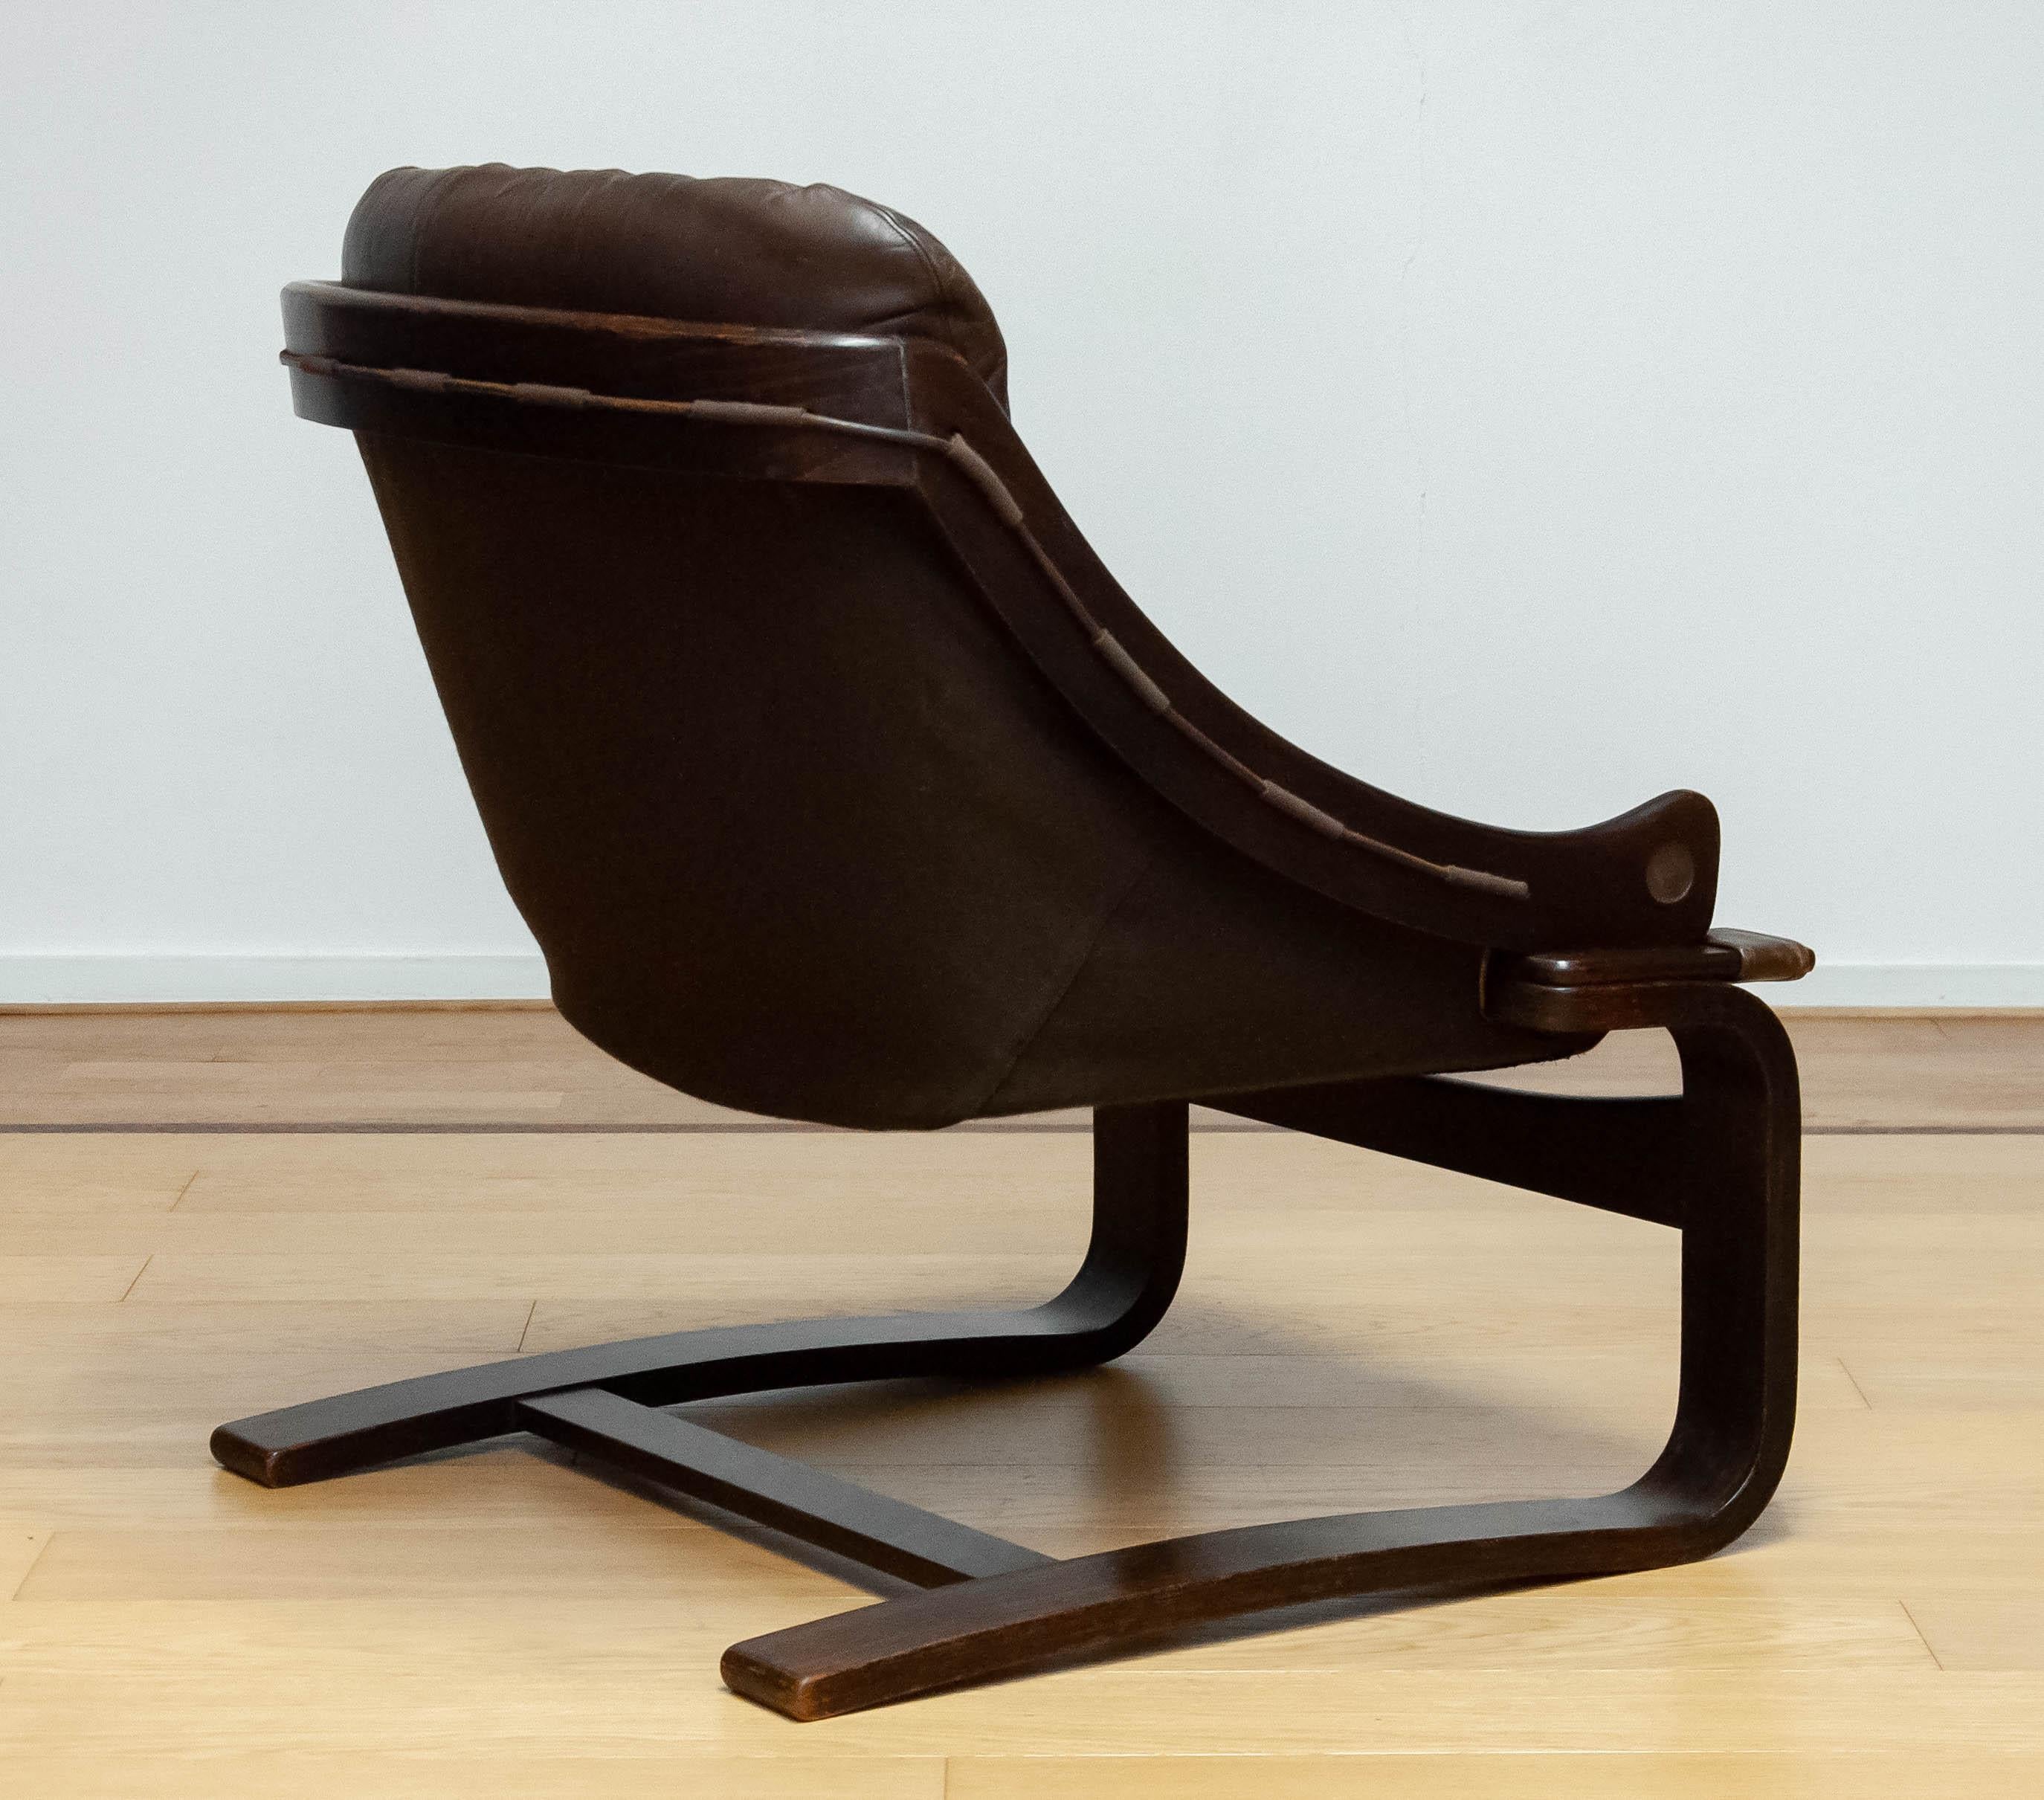 Late 20th Century 1970s Brown Leather Lounge Chair Model 'Krona' By Ake Fribytter For Nelo, Sweden For Sale